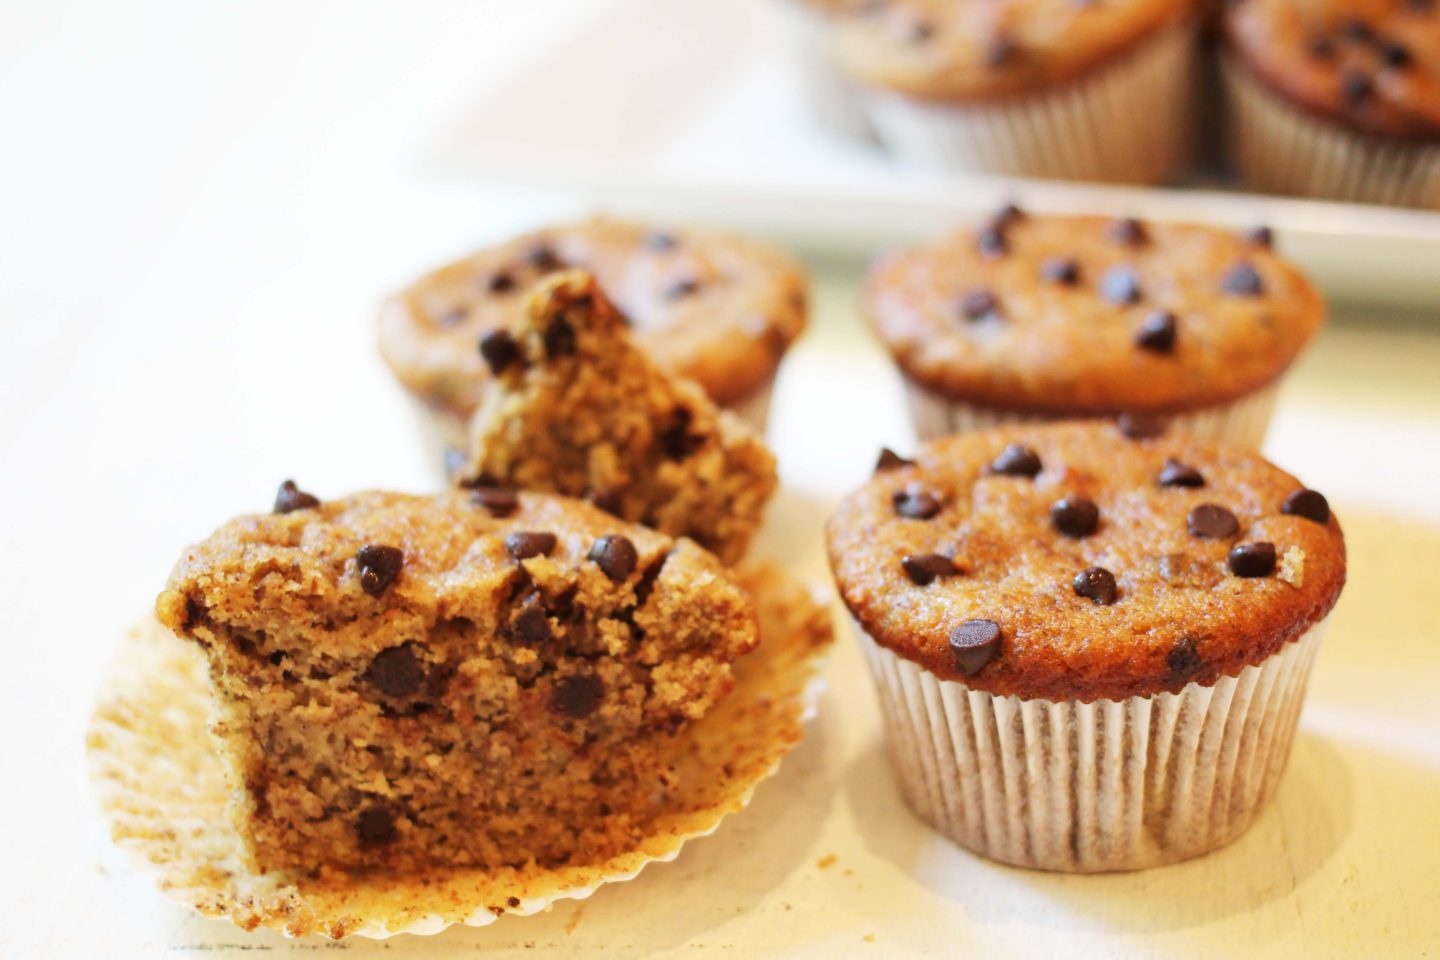 Cut open Maple Almond Butter Muffin with other muffins